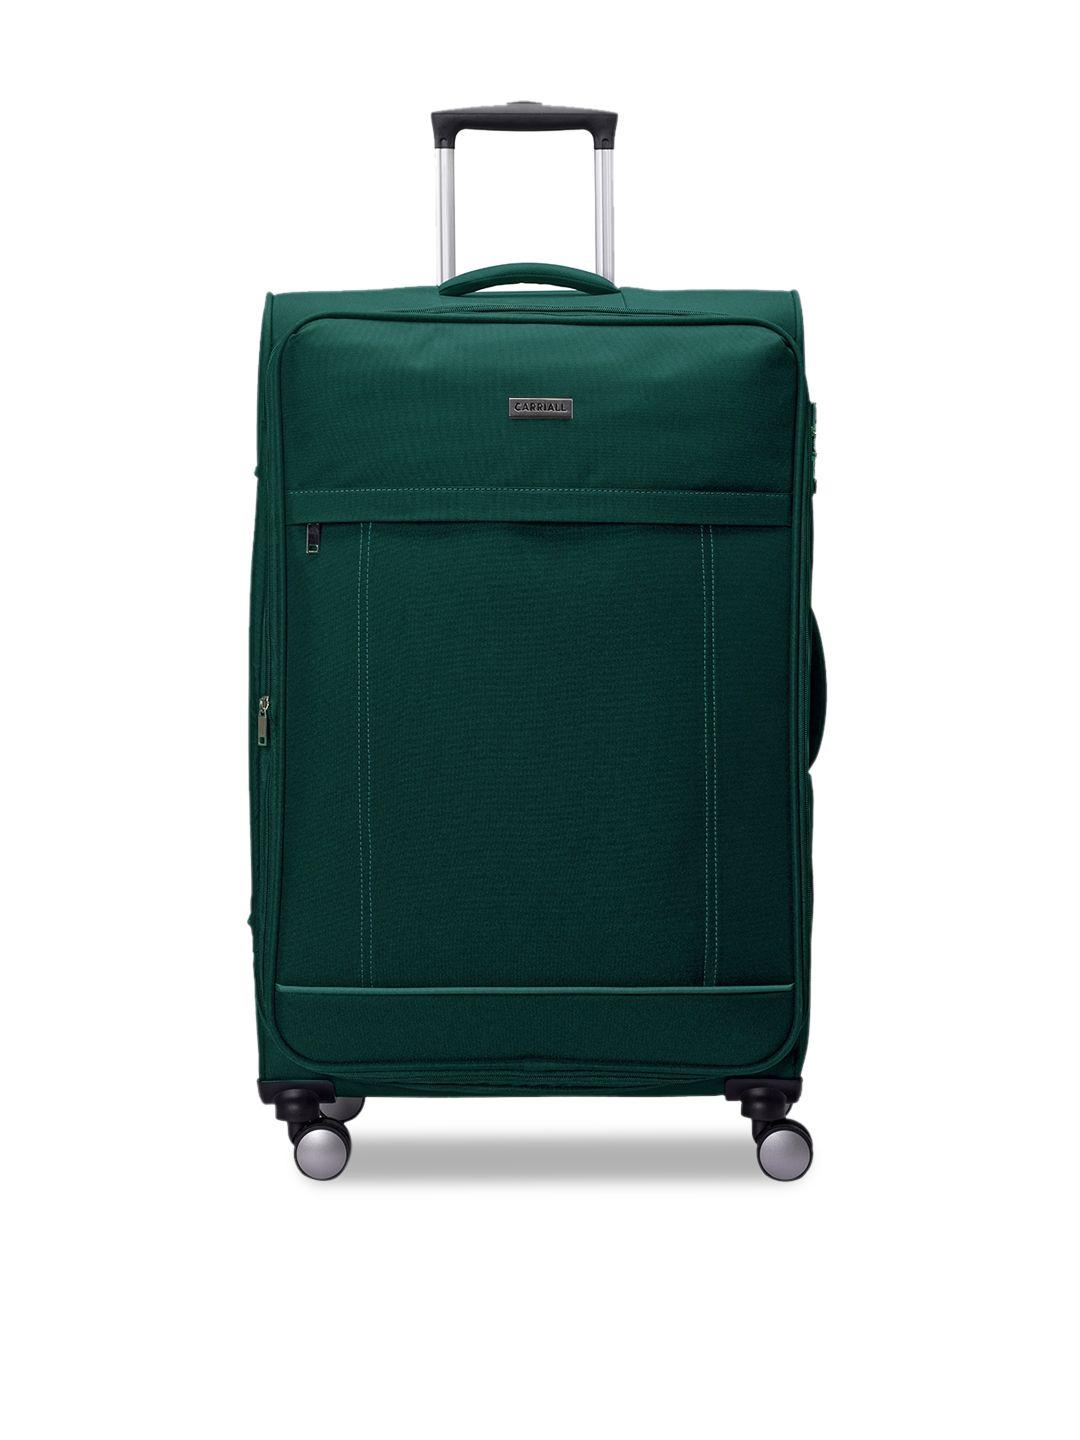 carriall green solid soft-sided large trolley suitcase